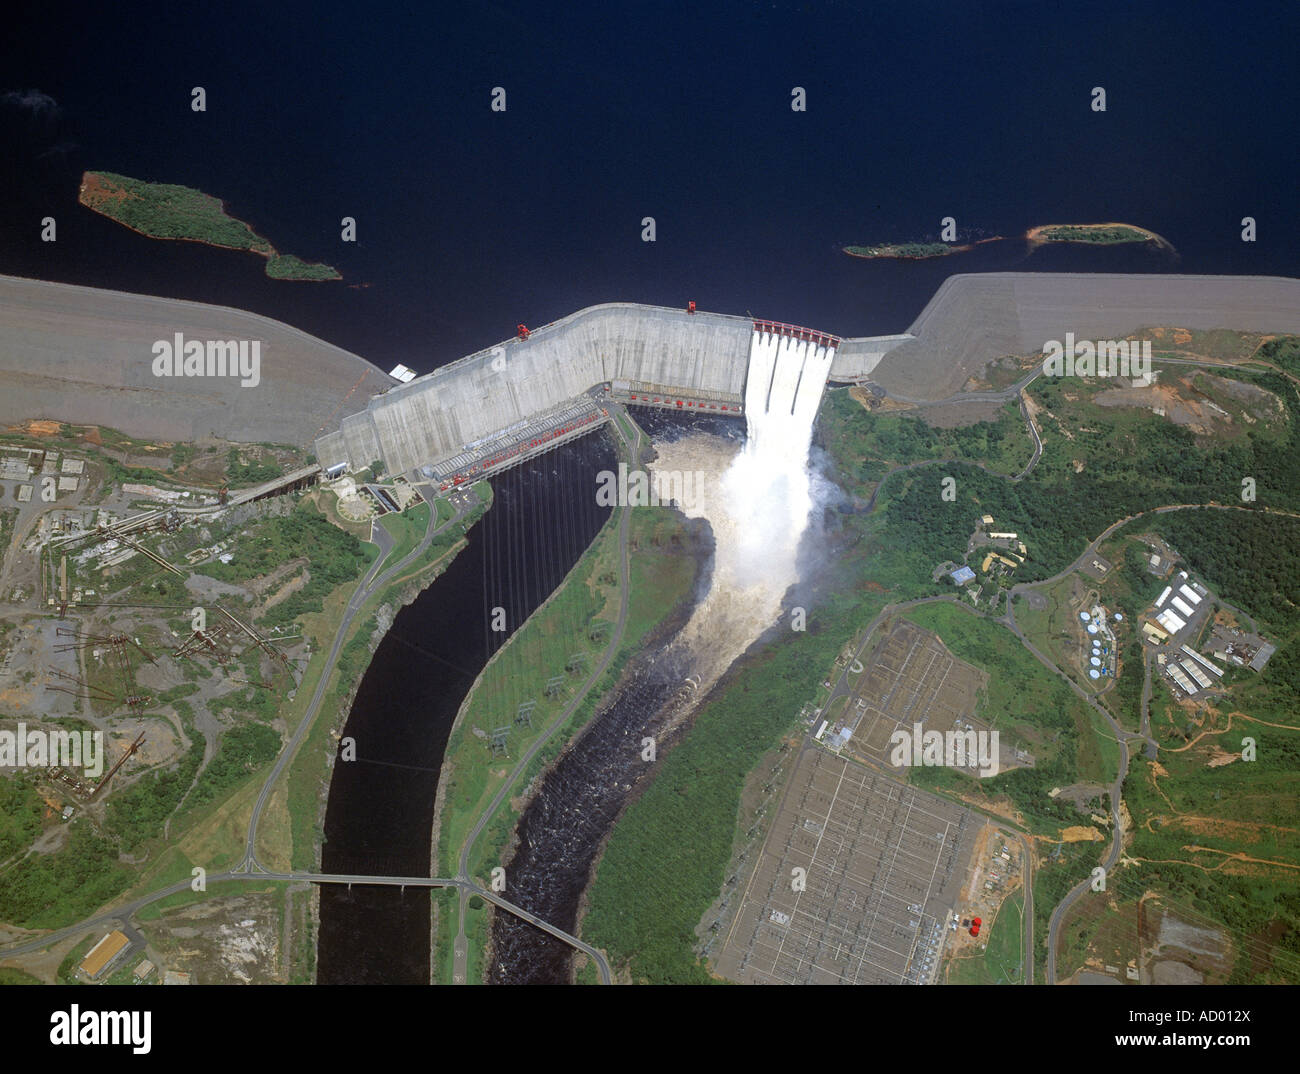 An overview of Guri Dam Venezuela on the Caroni River the Worlds 3rd Largest Hydroelectric Plant Stock Photo